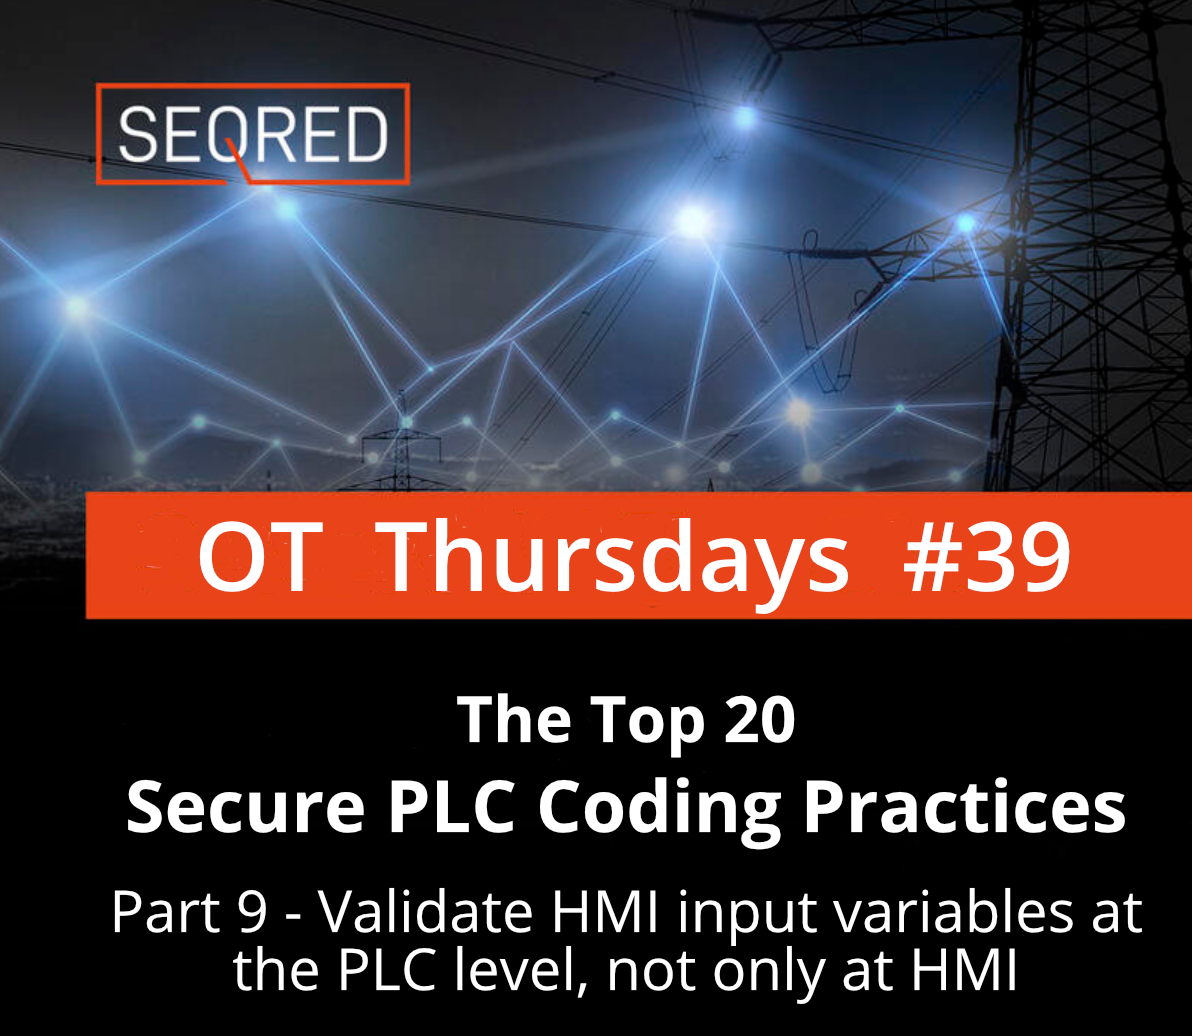 The Top 20 Secure PLC Coding Practices. Part 9 - Validate indirections